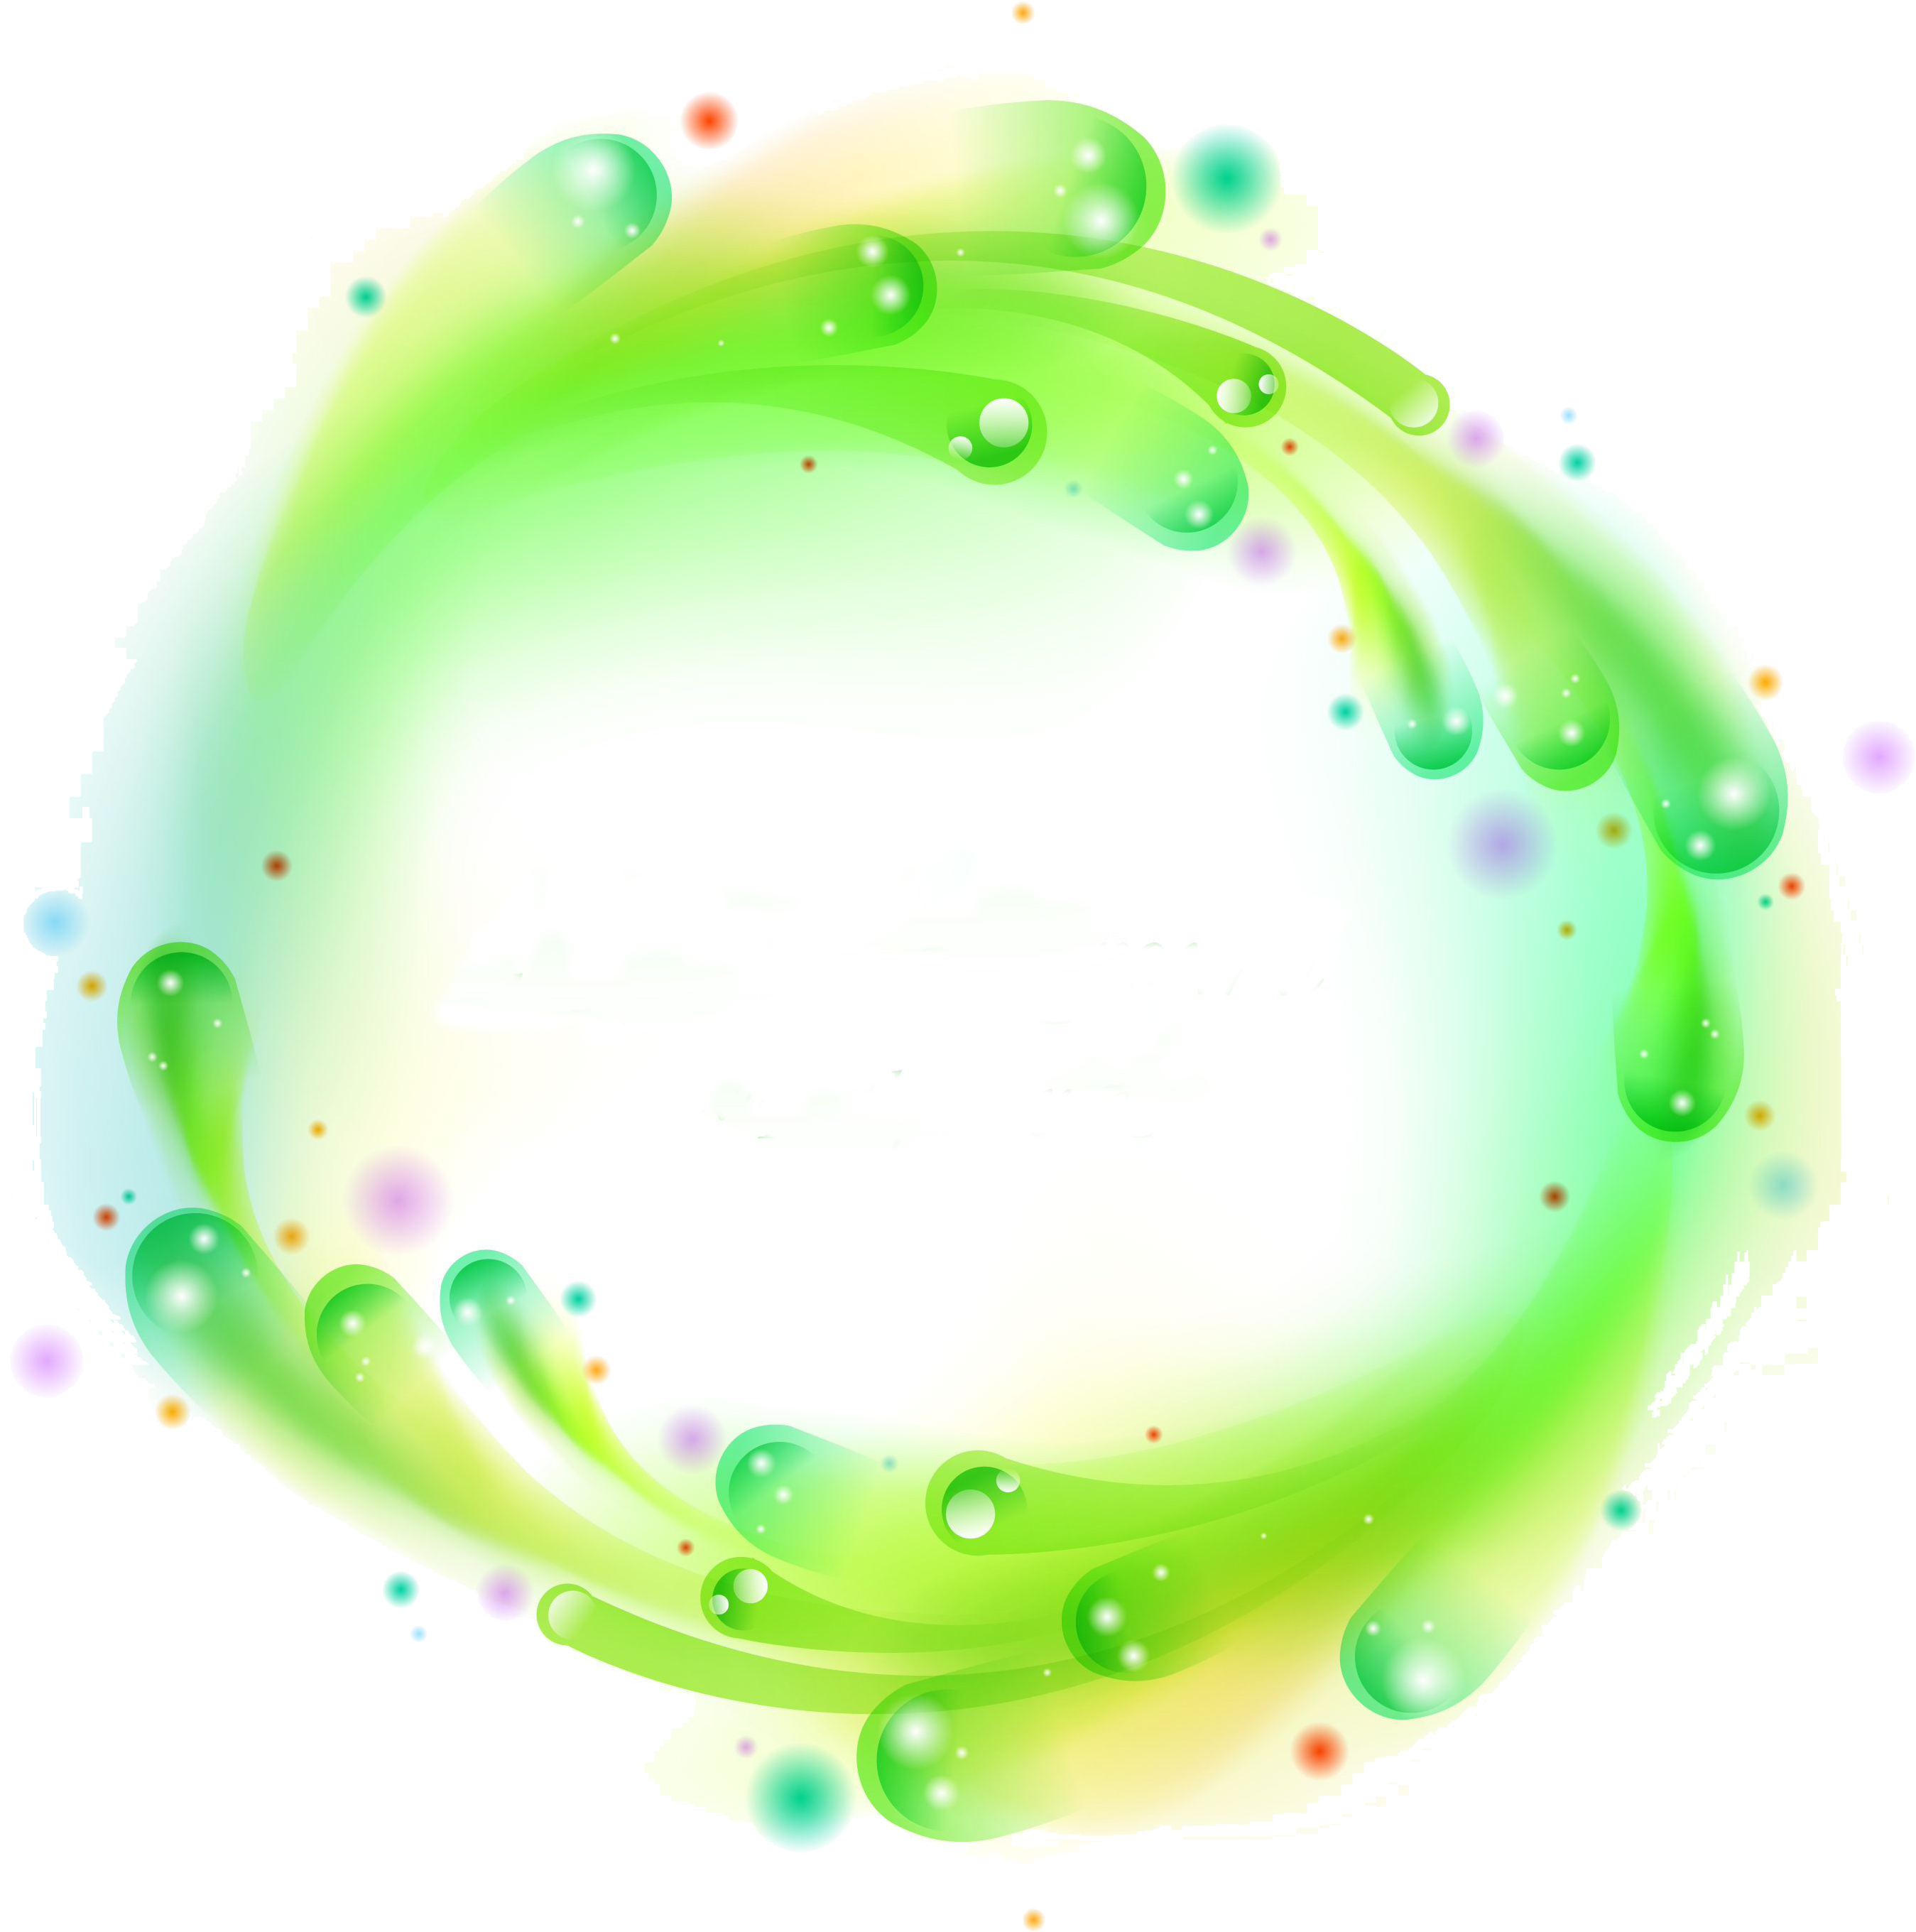 Round Dream Bubble Modeling Vector - Vector Graphics (2917x2719)